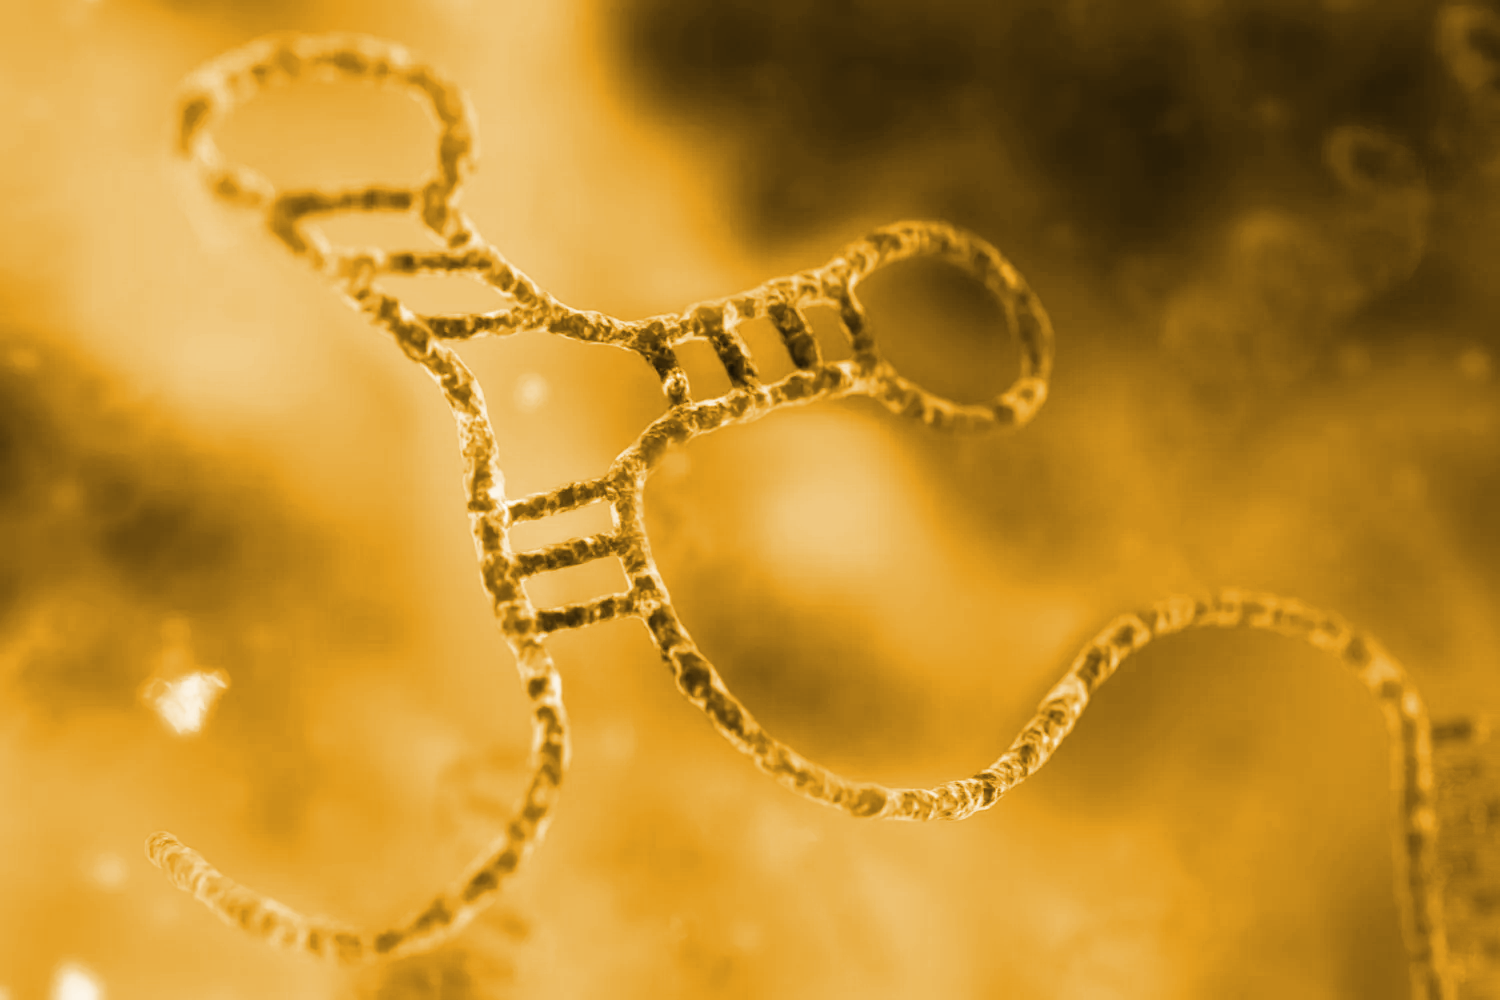 Yellow single-stranded nucleotide